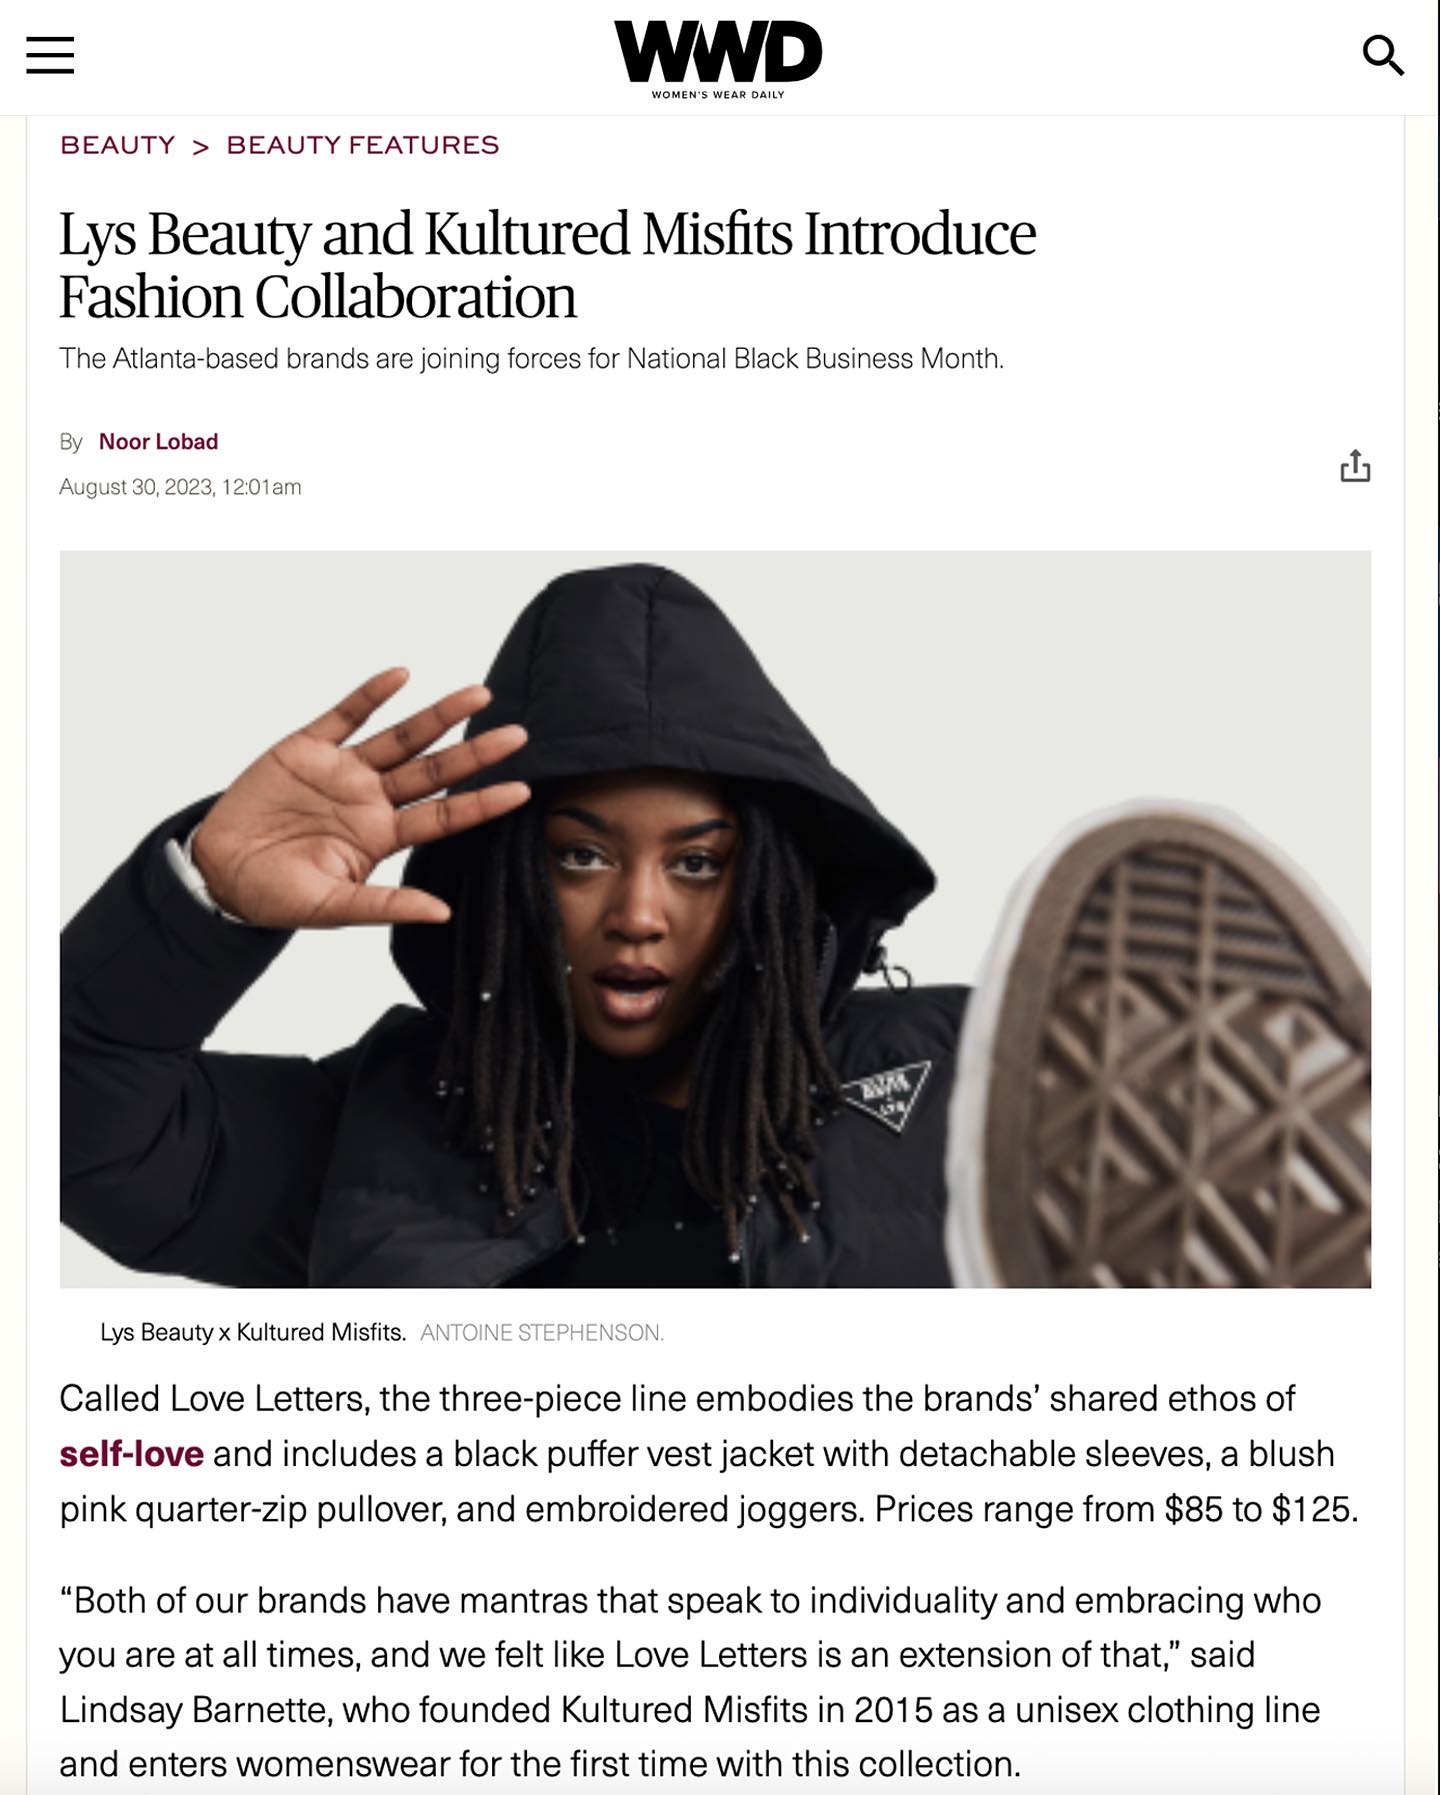 WWD Feature : LYS Beauty and Kultured Misfits Introduce Fashion Collaboration